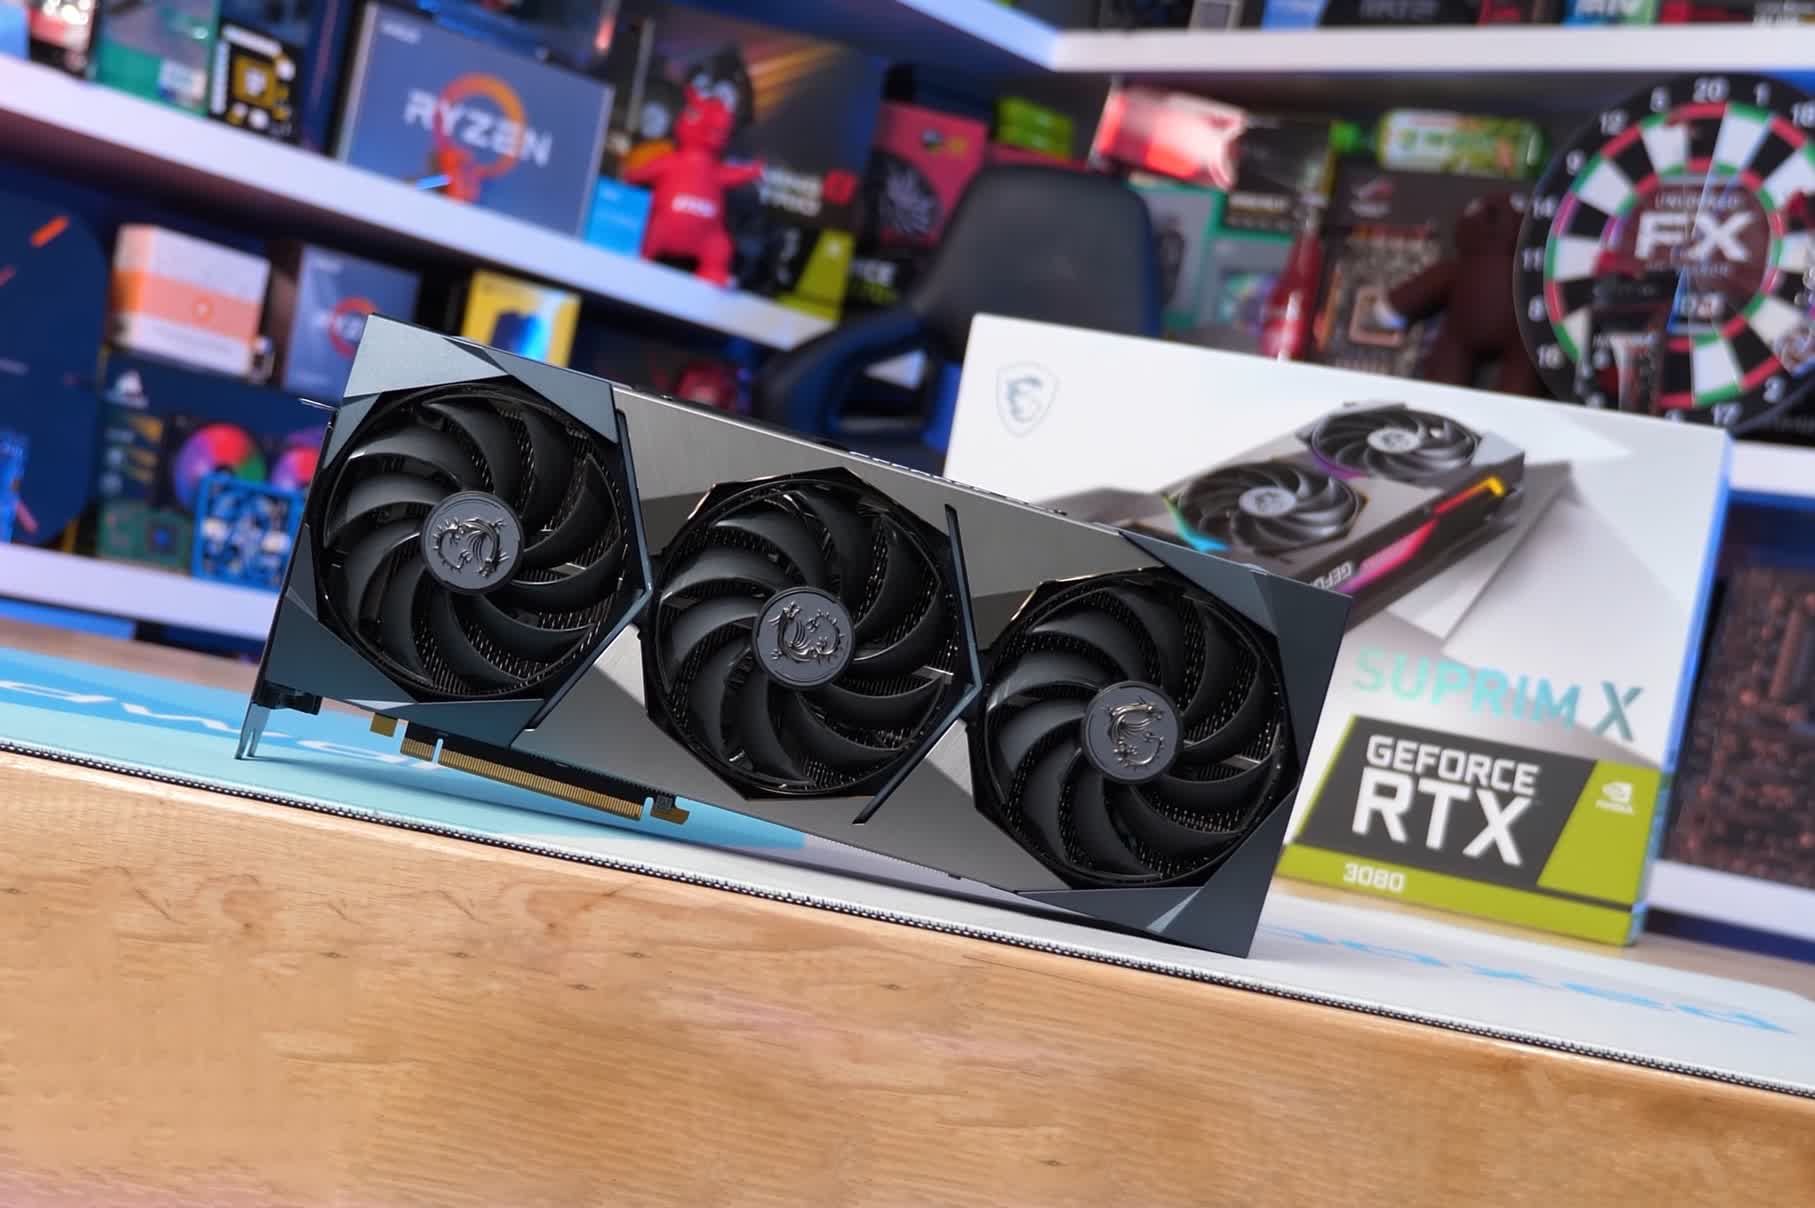 Nvidia GeForce RTX 3080 12GB Review | TechSpot